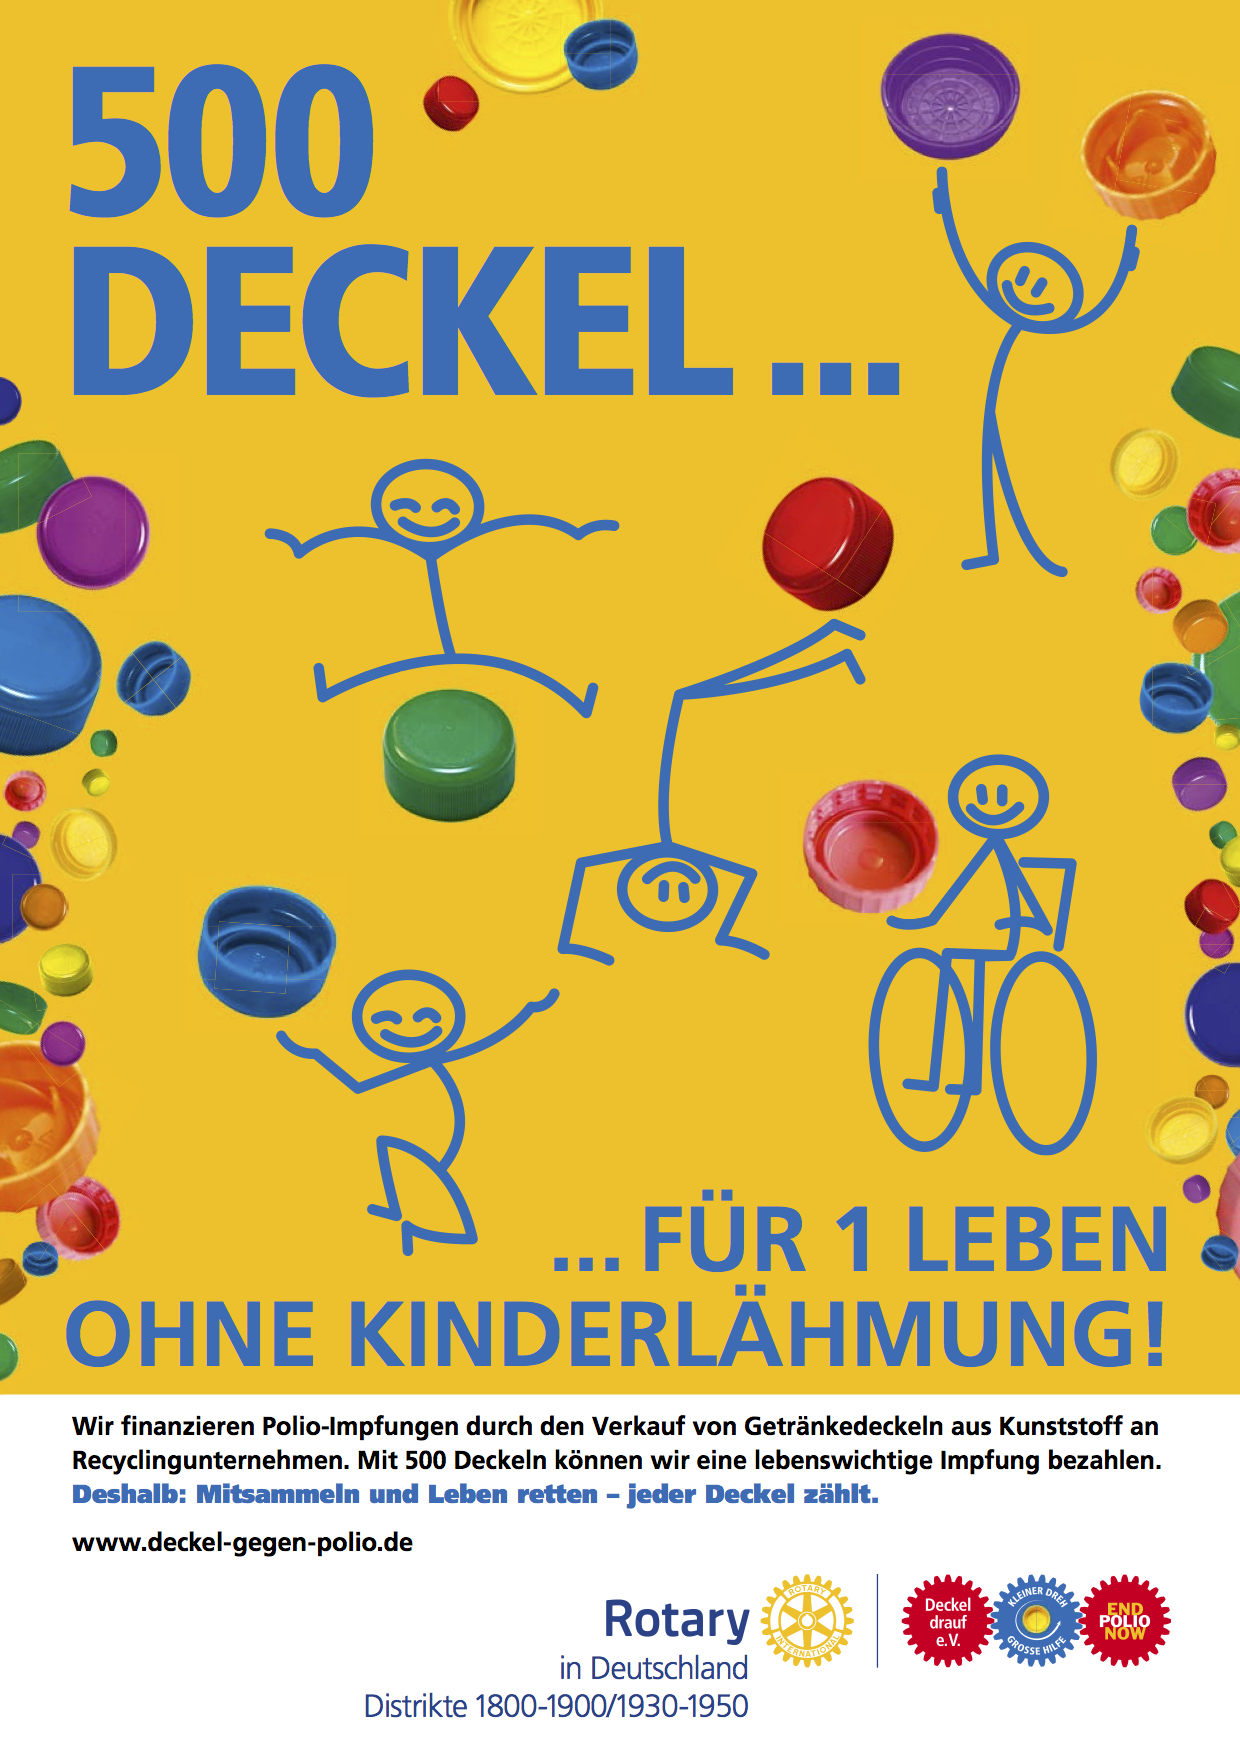 Deckel_Rotary_Plakat_DIN_A4.png